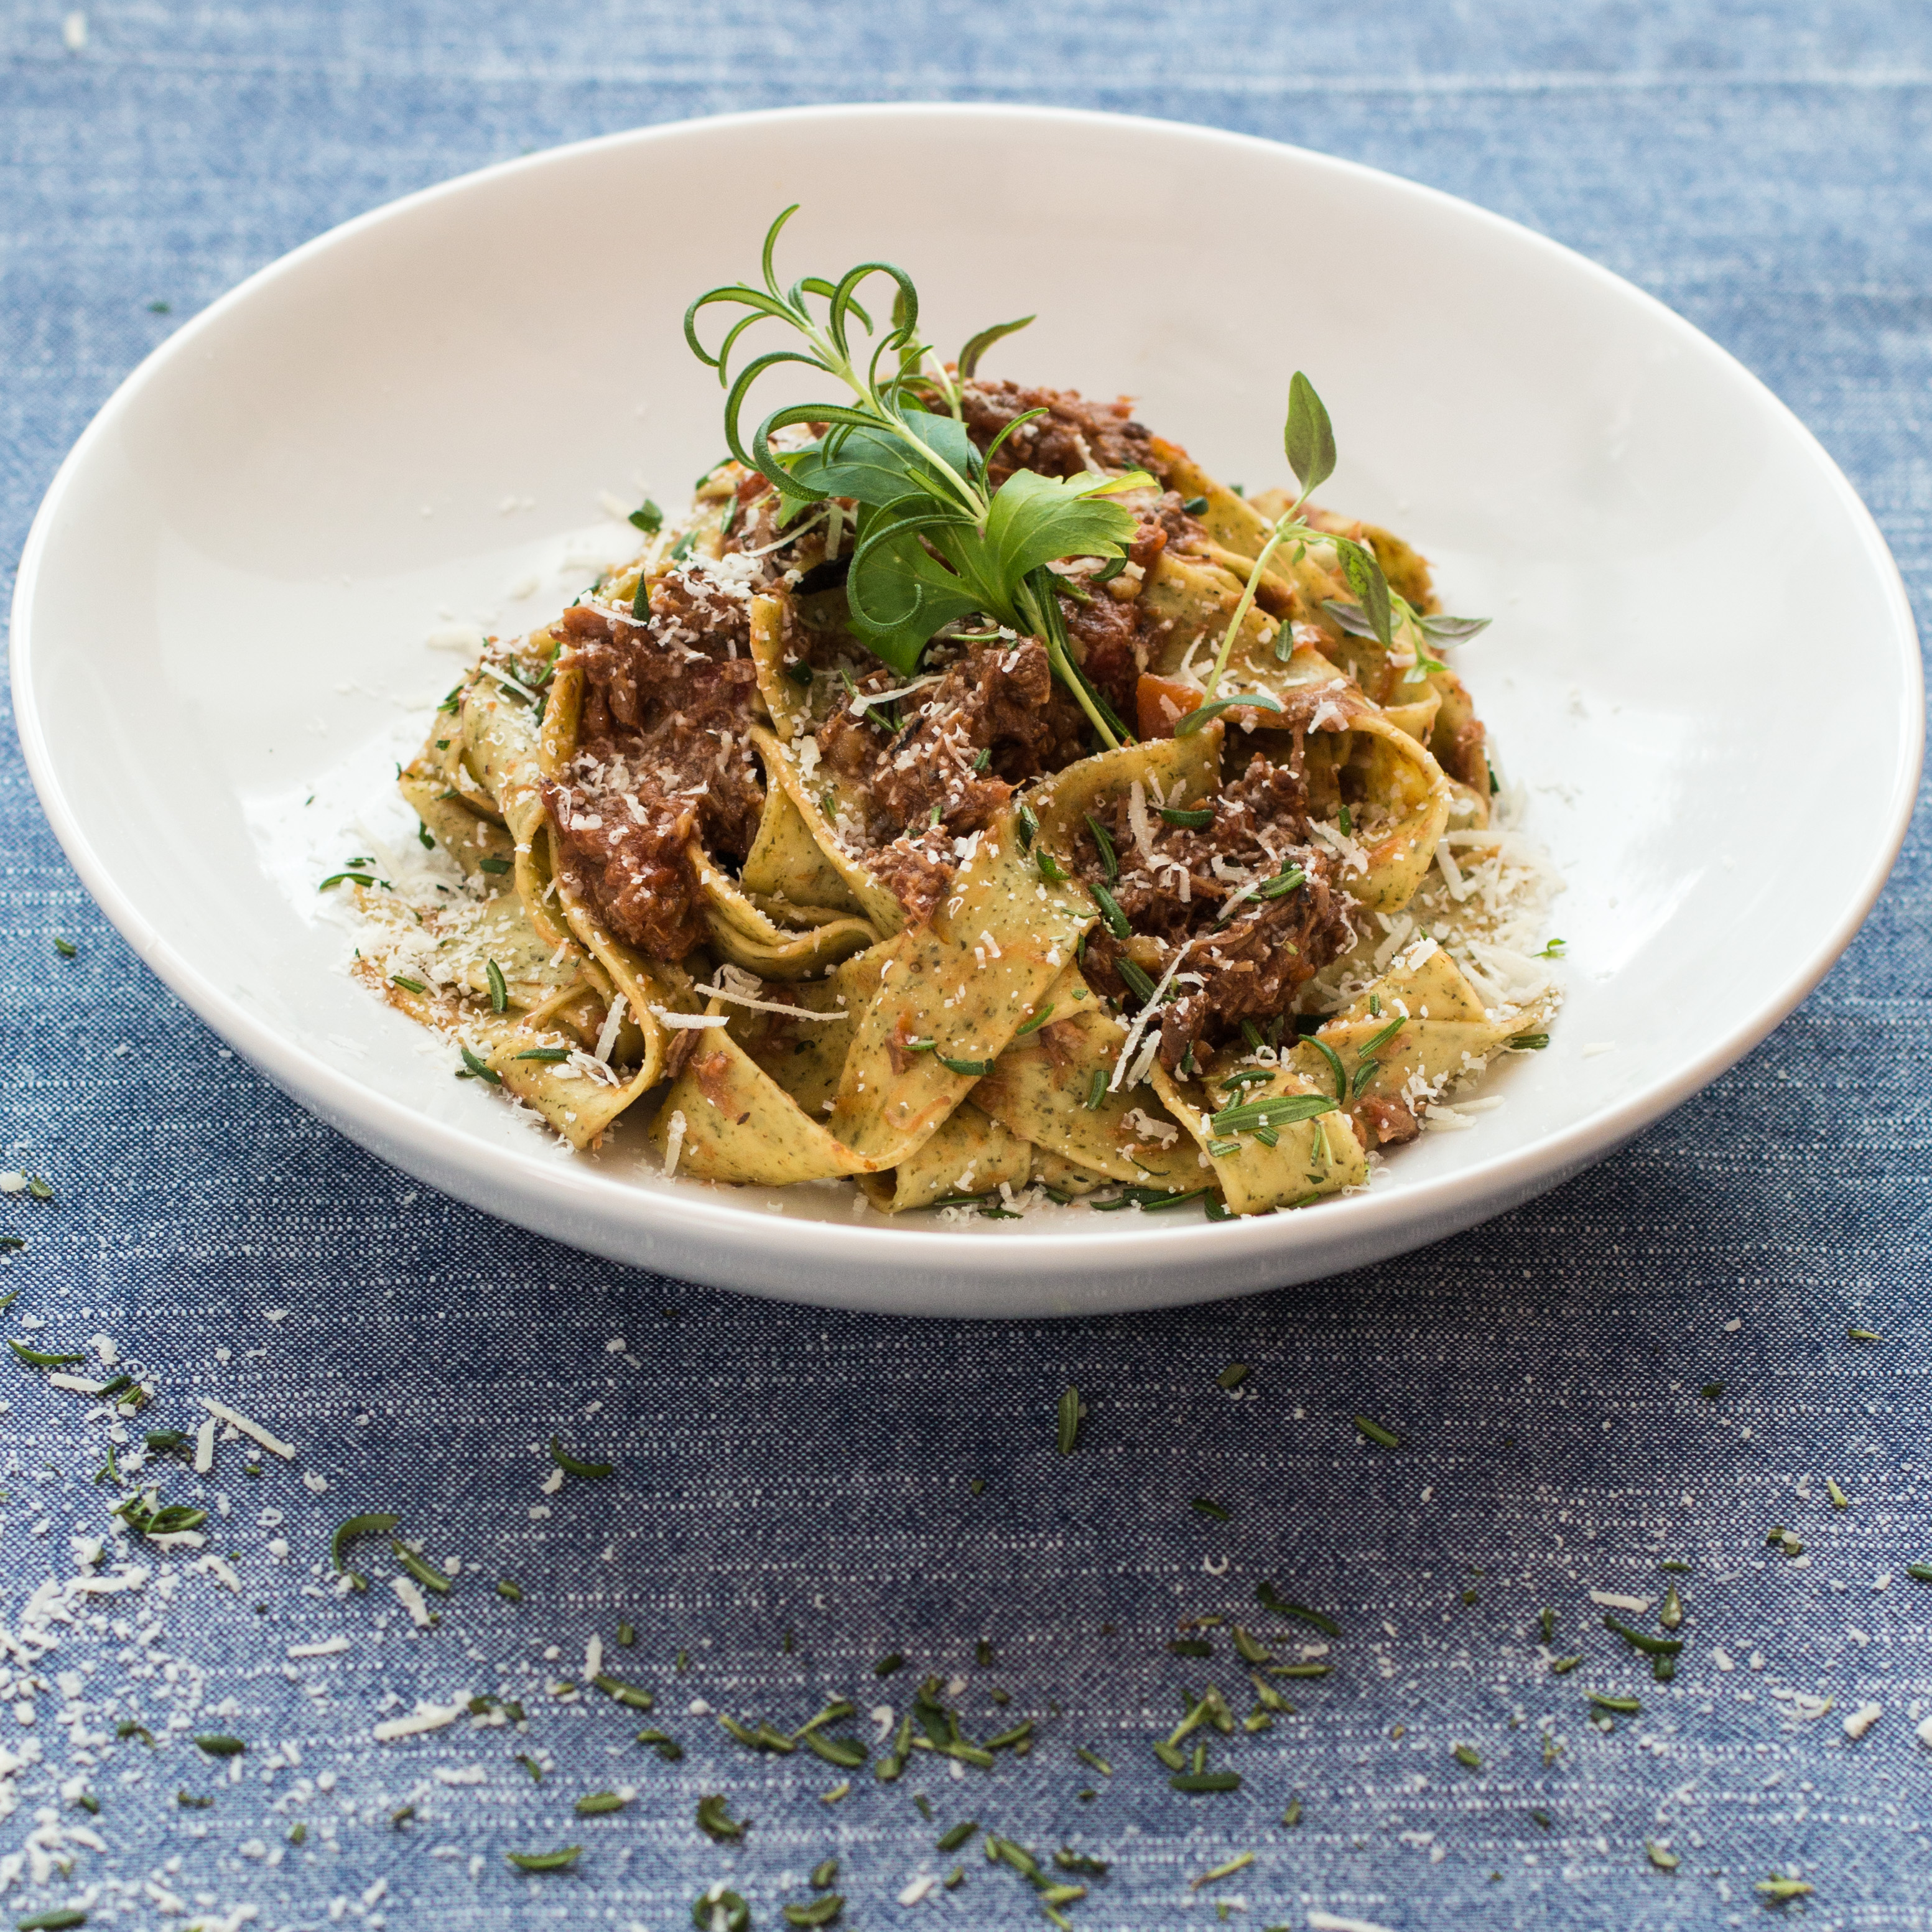 Amazing Slow-Cooked Italian Lamb Ragout with Pasta - Lost in a Pot